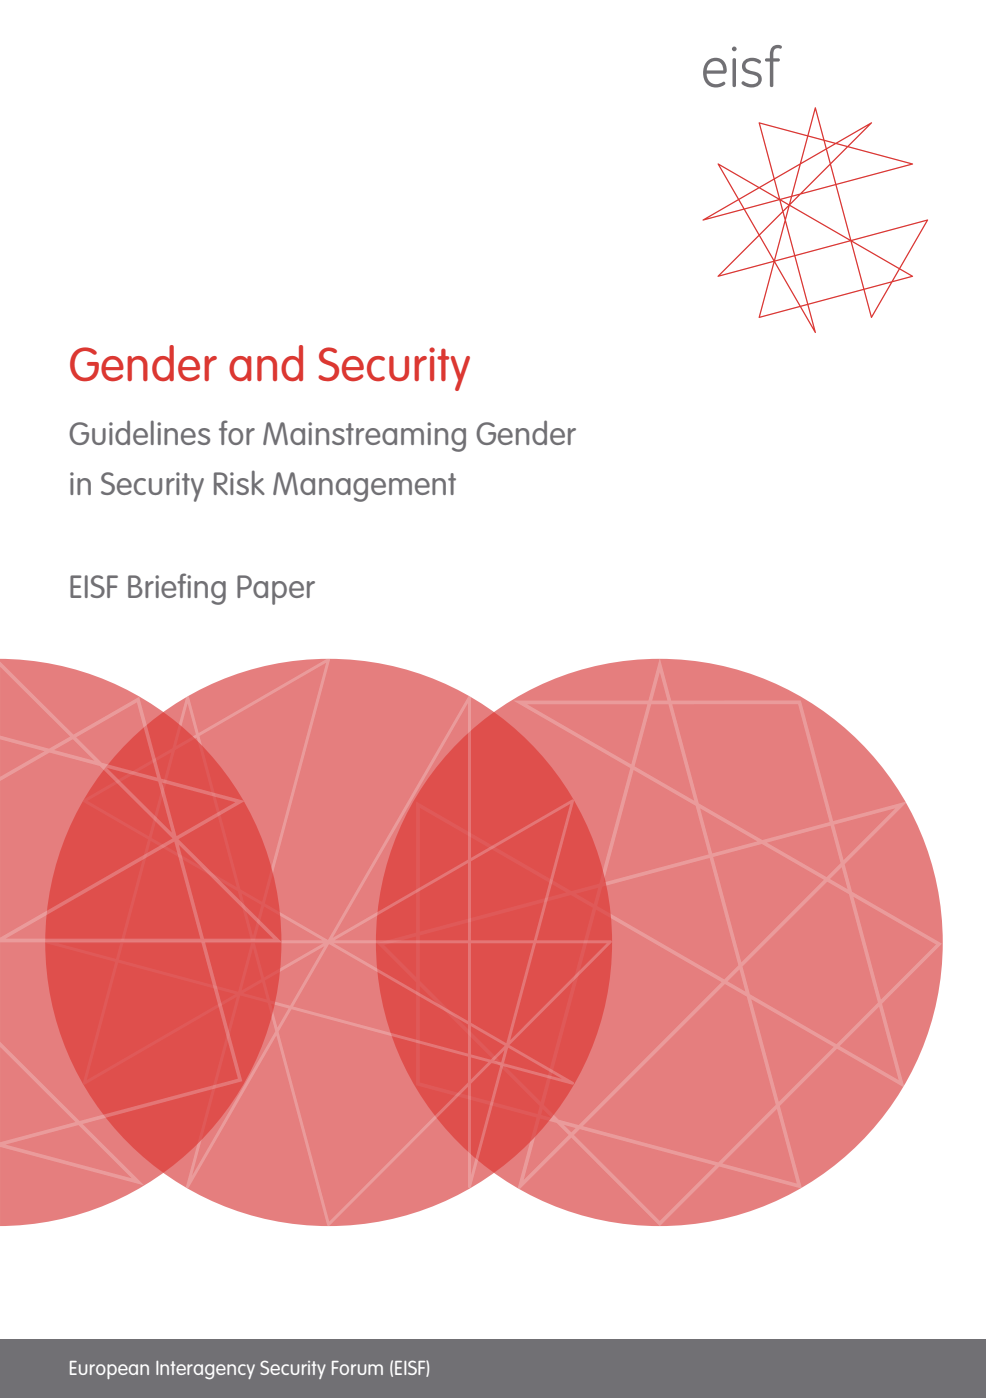 Gender and Security: Guidelines for mainstreaming gender in security risk management